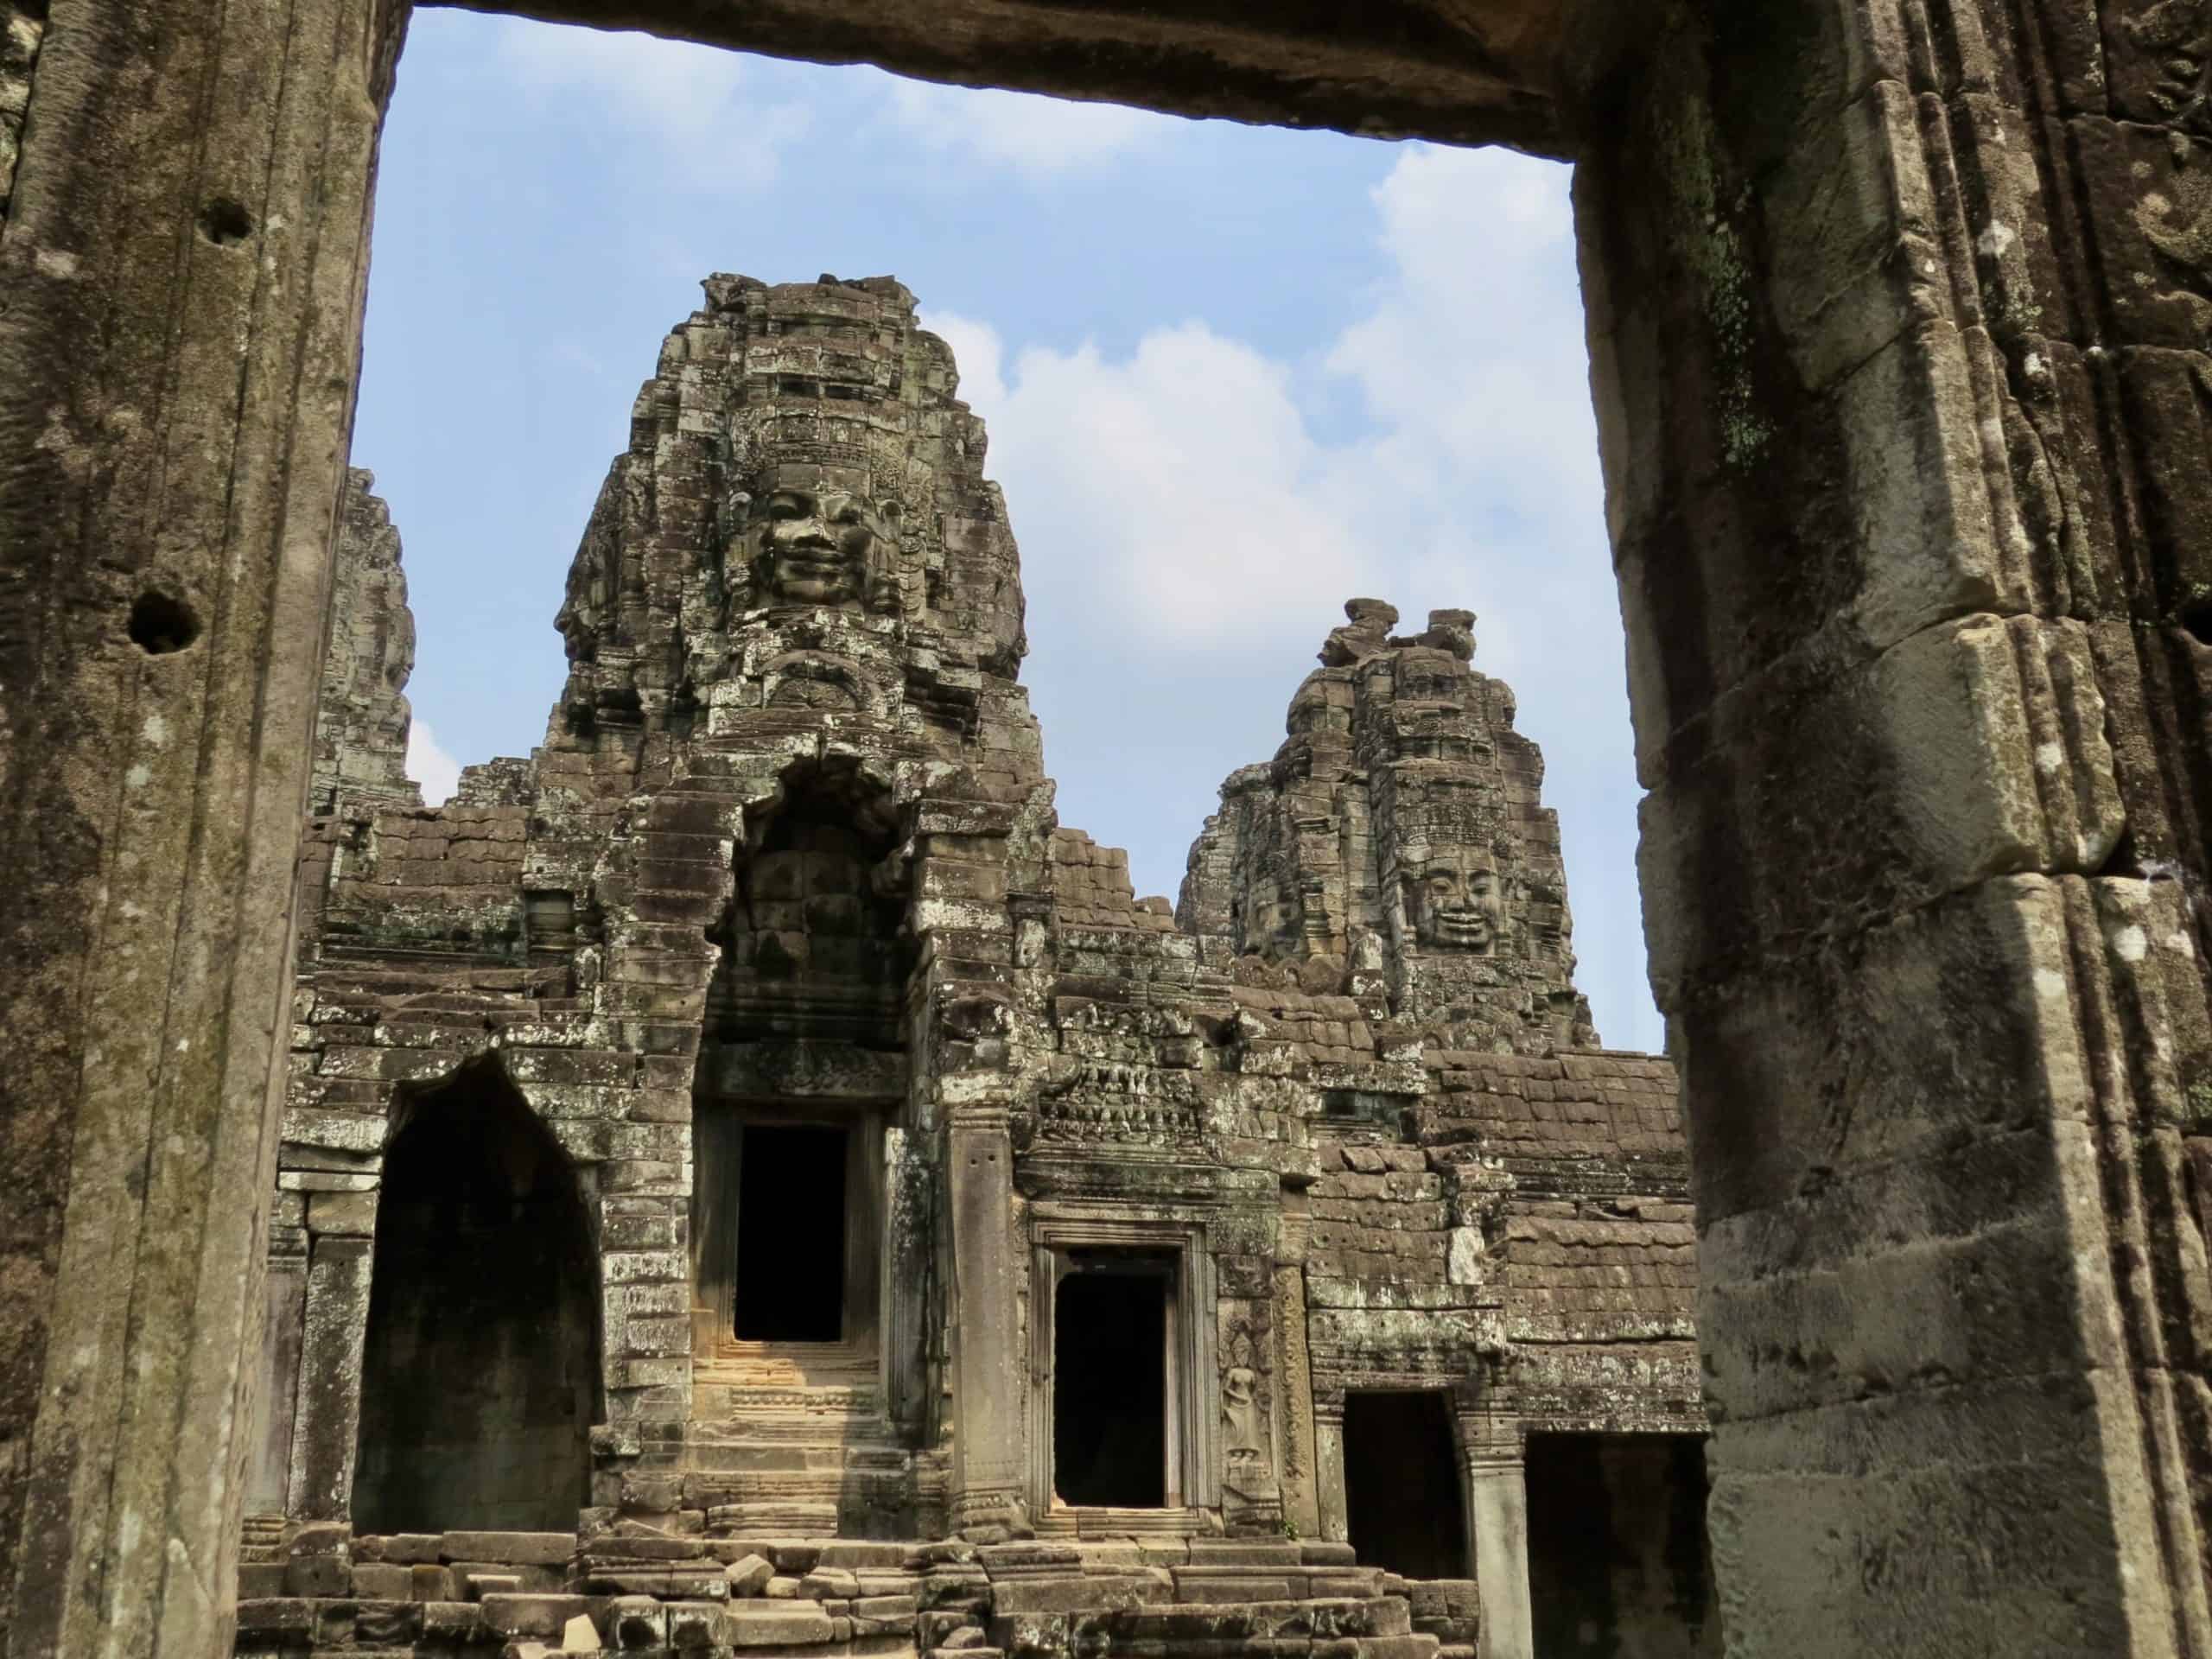 Bayon temple with its 216 stone faces